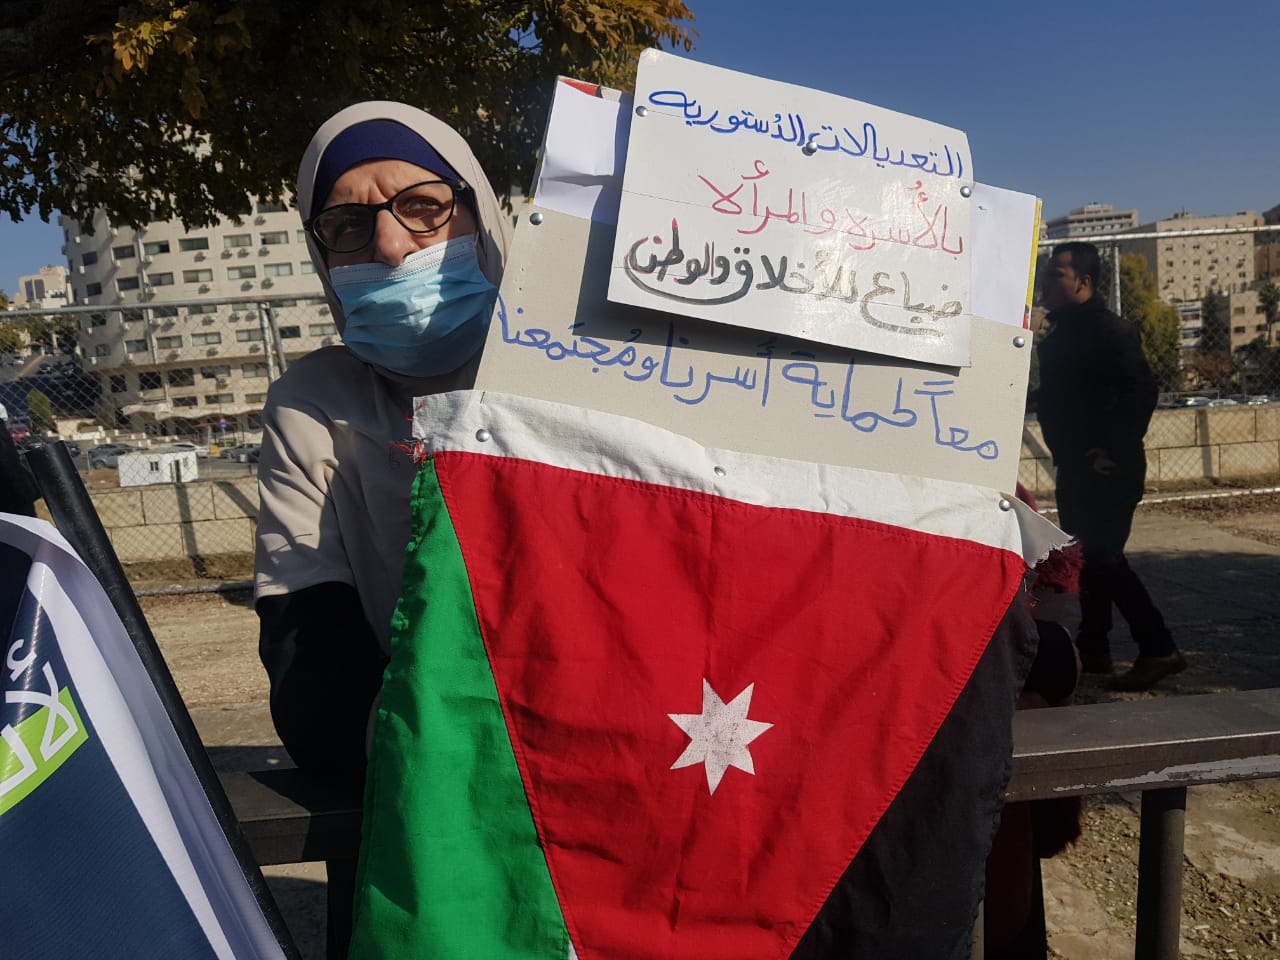 A women protesting for women's rights outside Jordan's parliament (MEE/Mohammad Ersan)